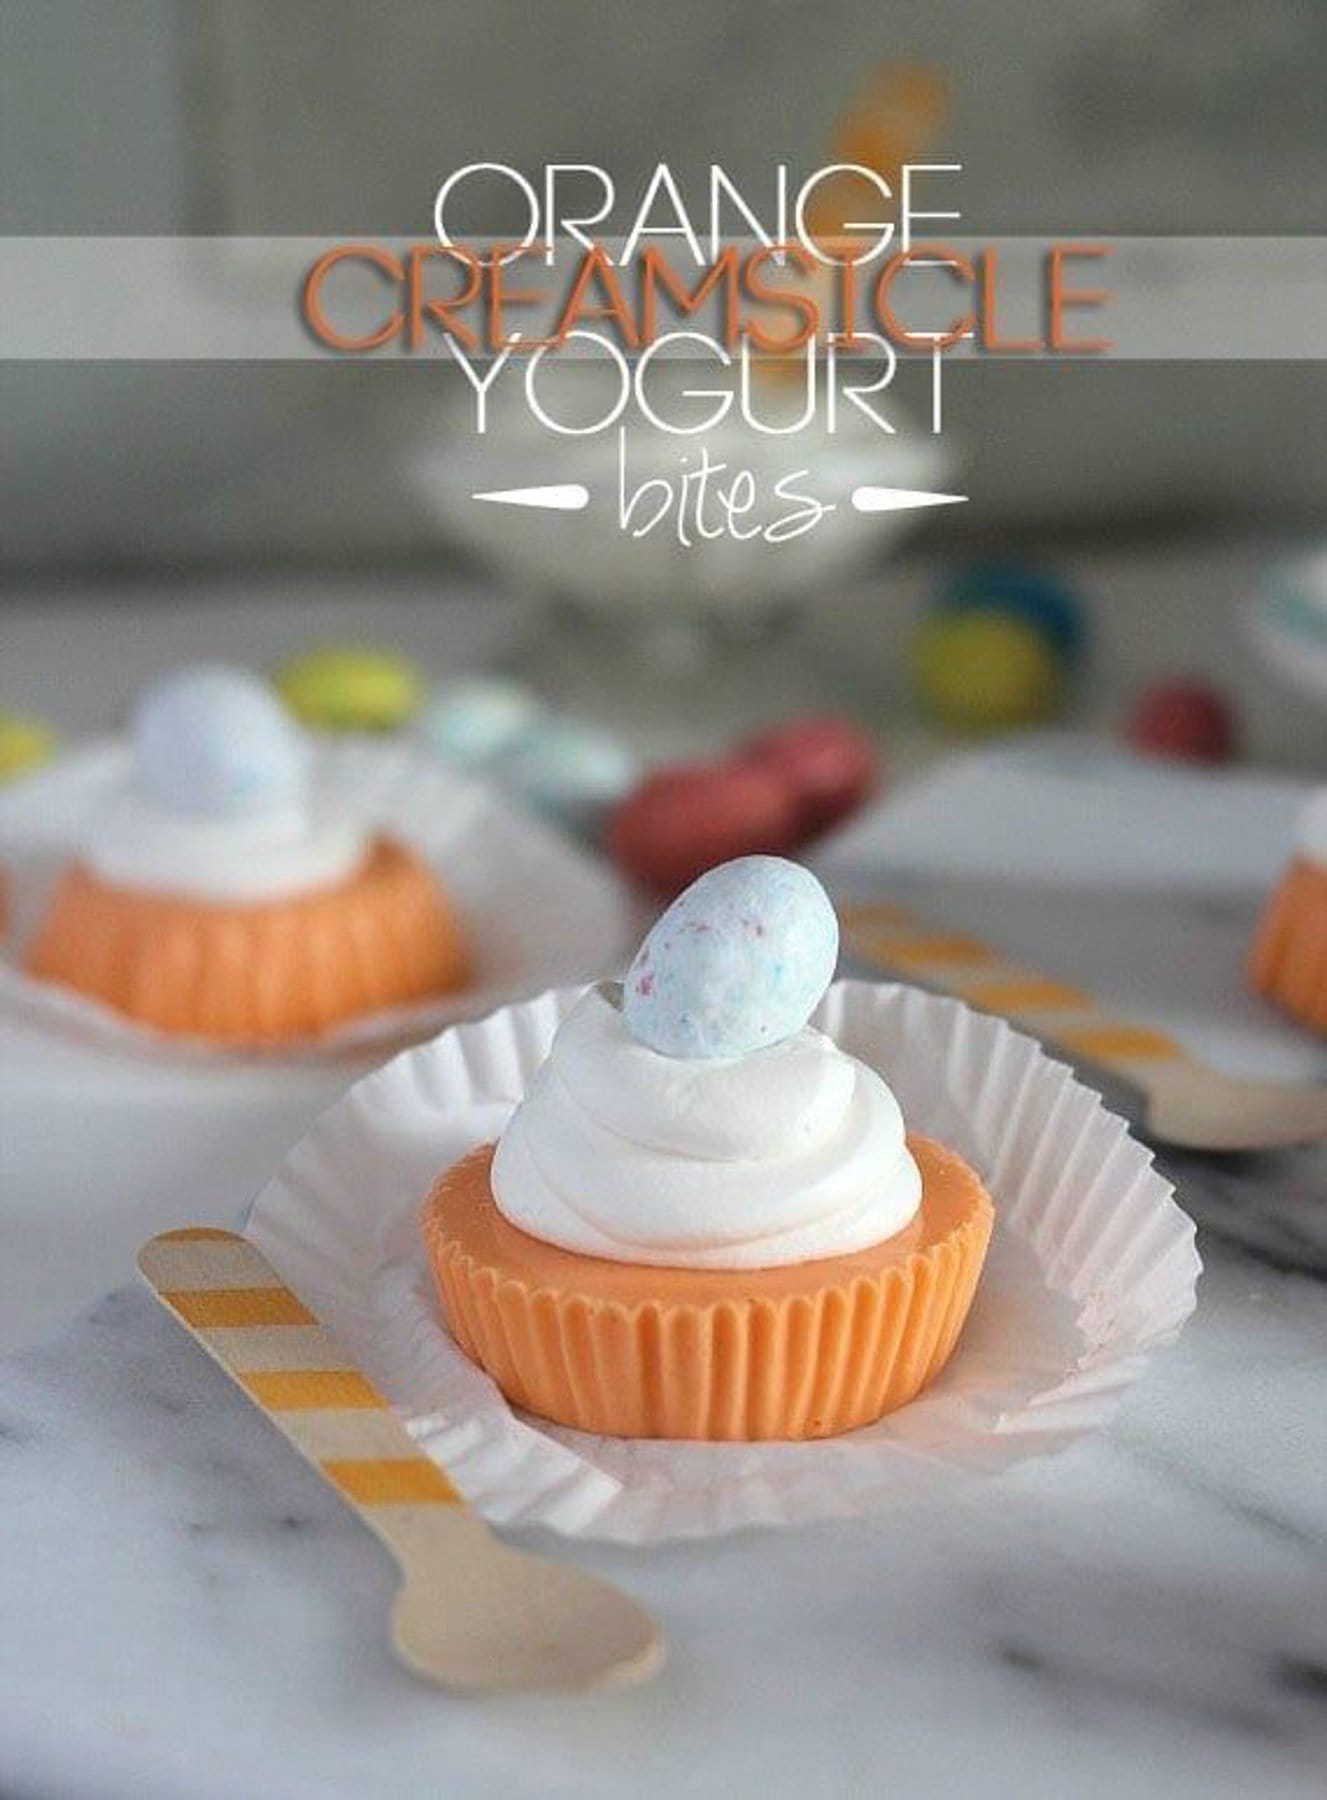 Creamsicle yogurt bites topped with whipped cream